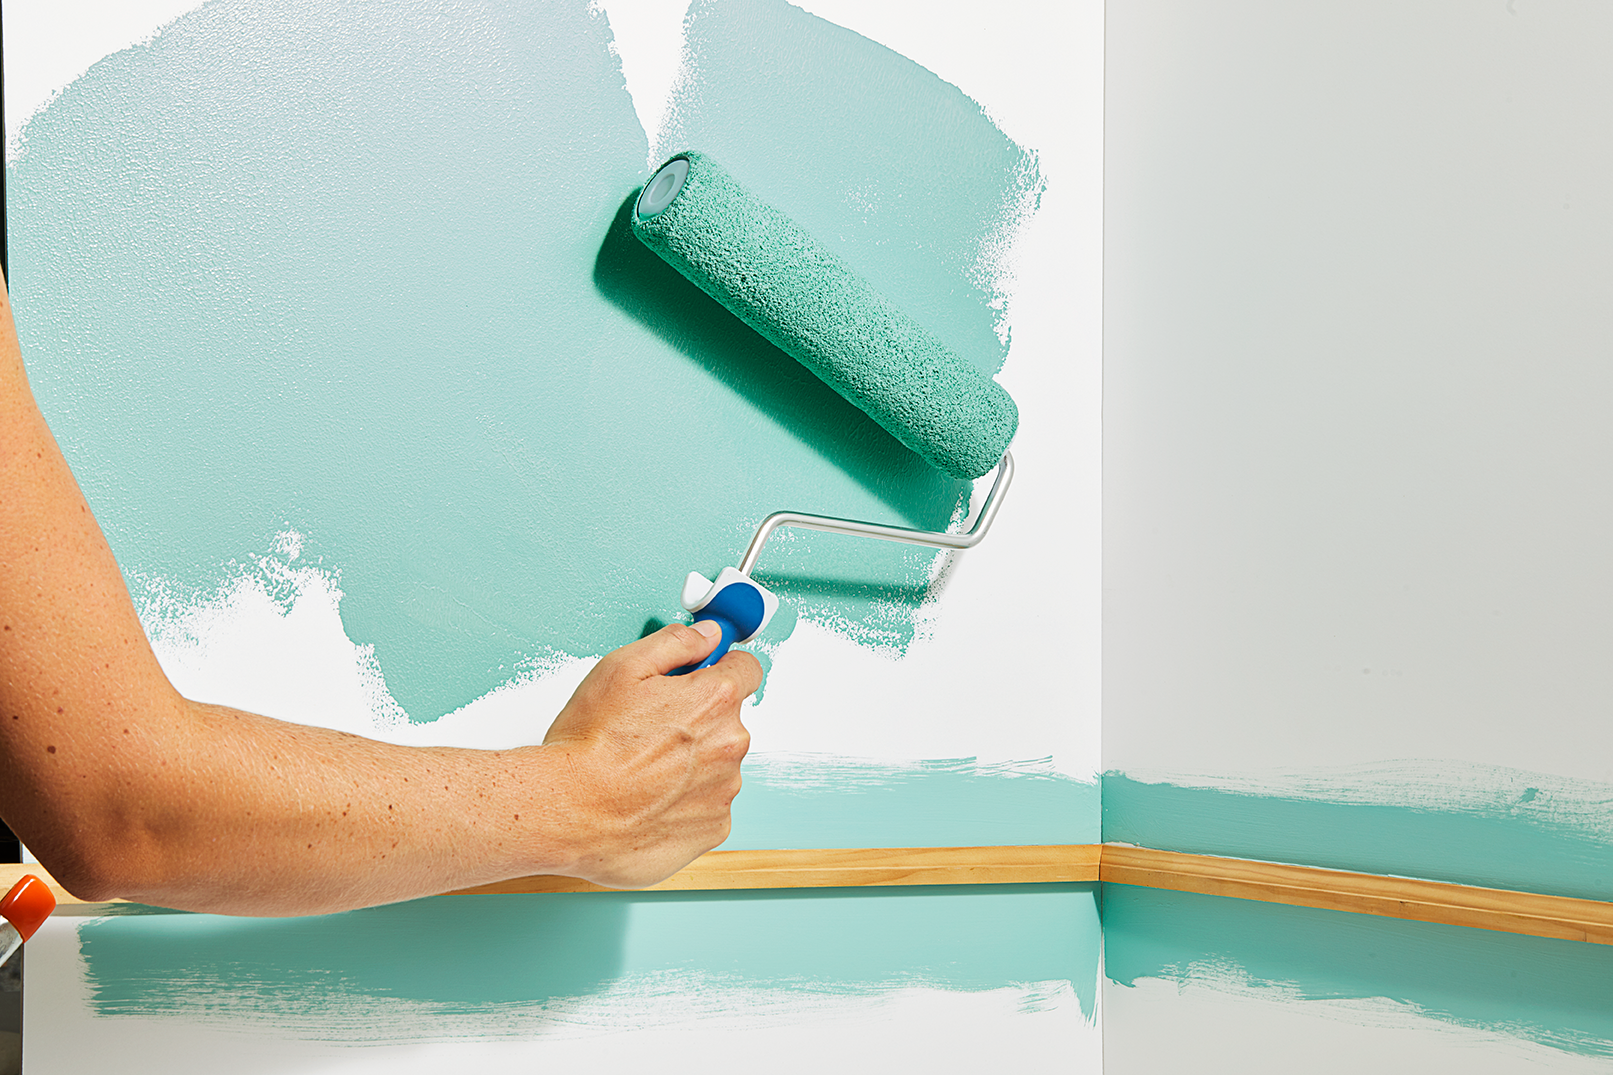 how long does it take to paint a room